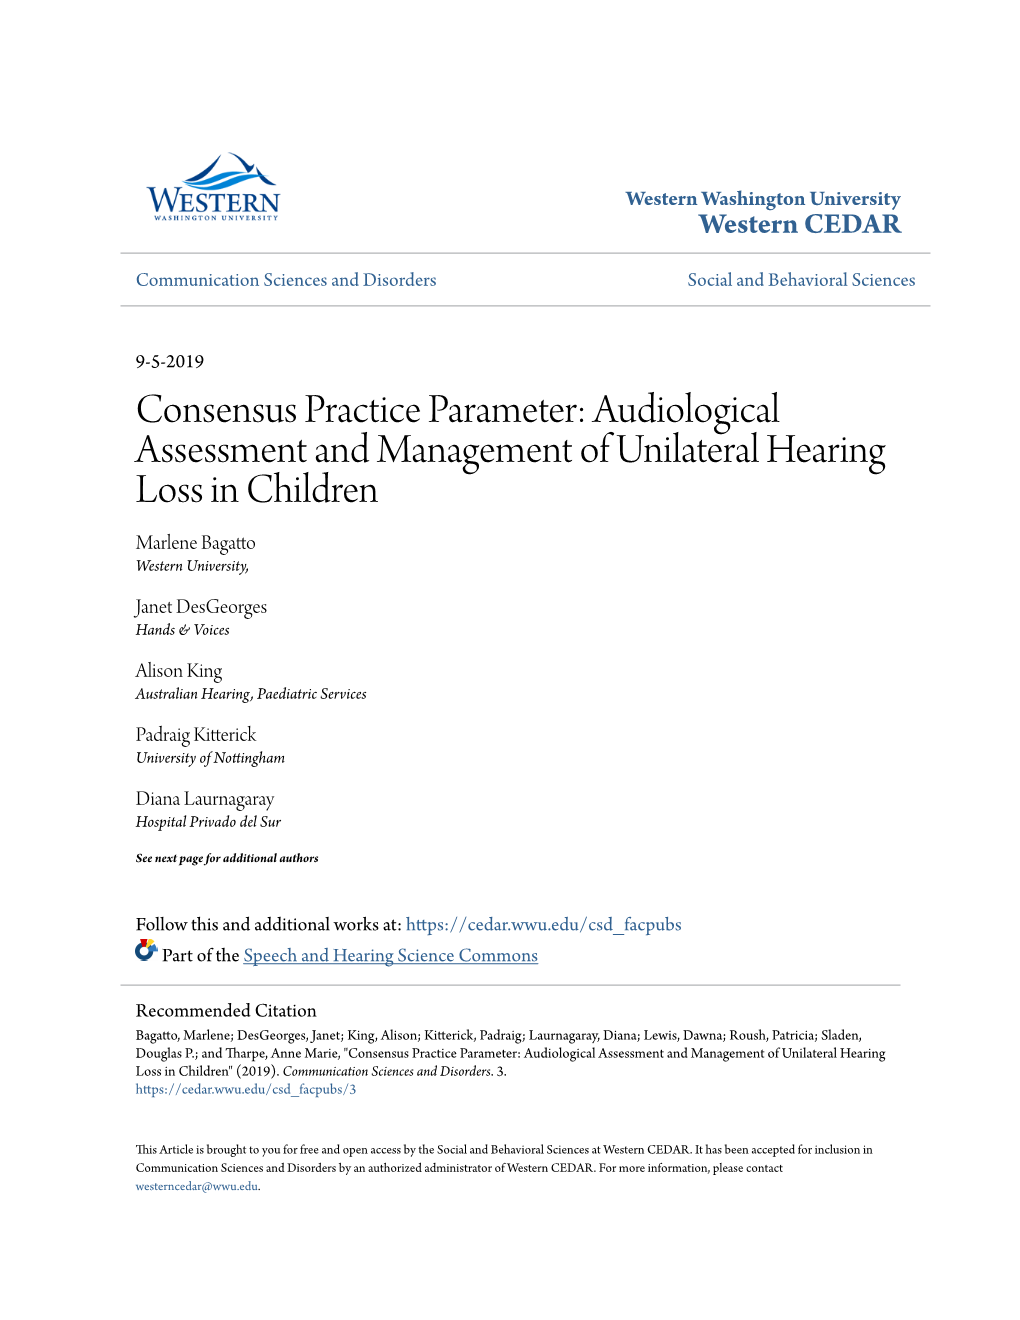 Audiological Assessment and Management of Unilateral Hearing Loss in Children Marlene Bagatto Western University